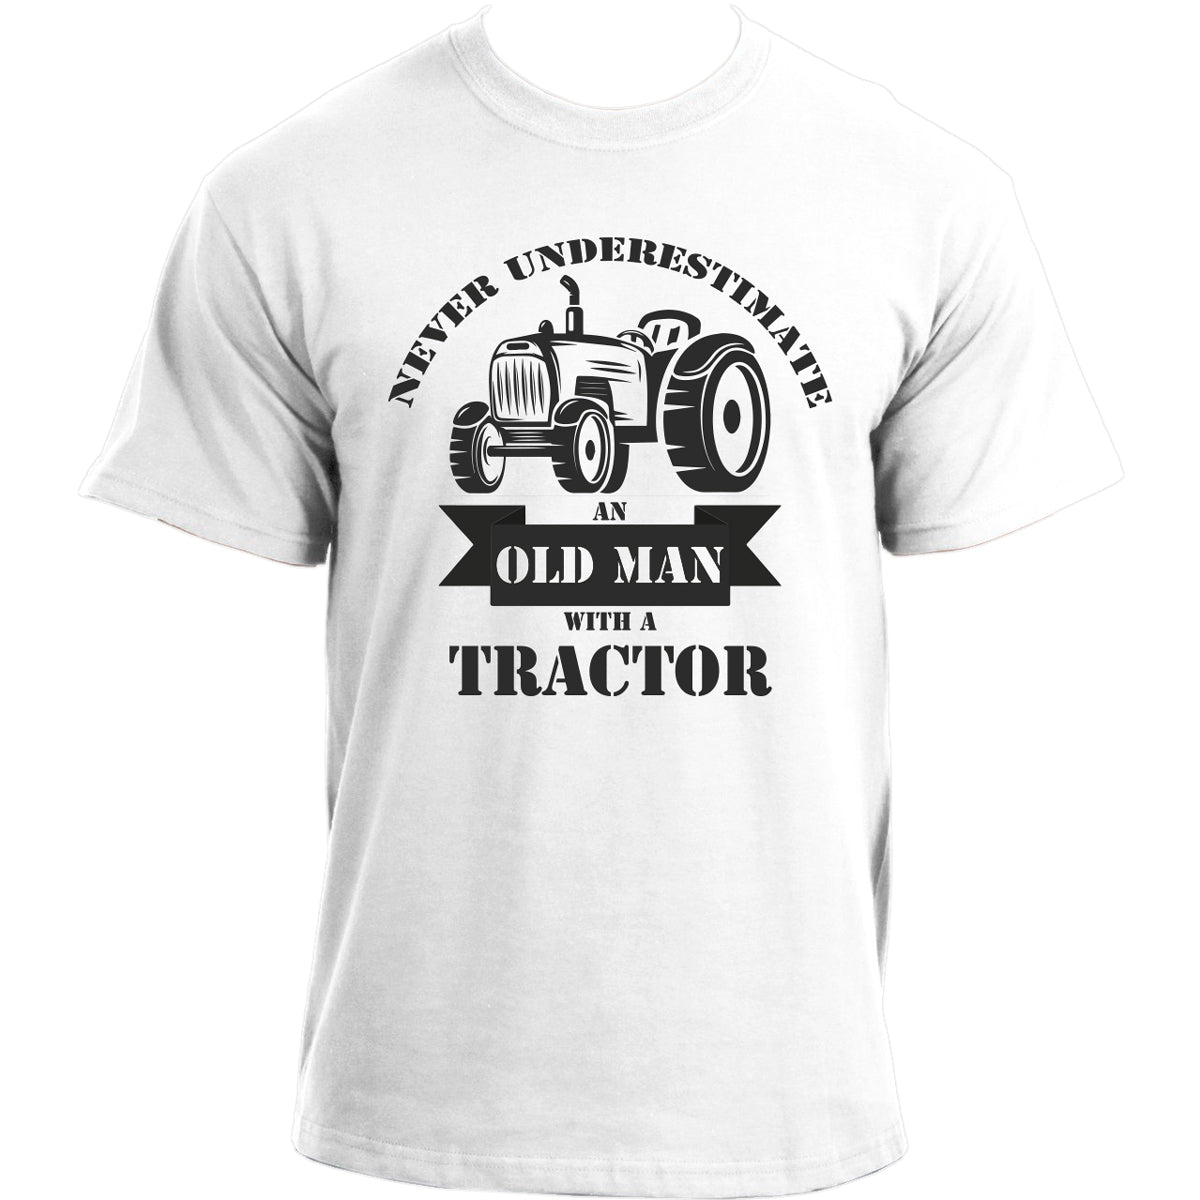 Never Underestimate An Old Man With A Tractor Funny Farmer T-shirt For Men